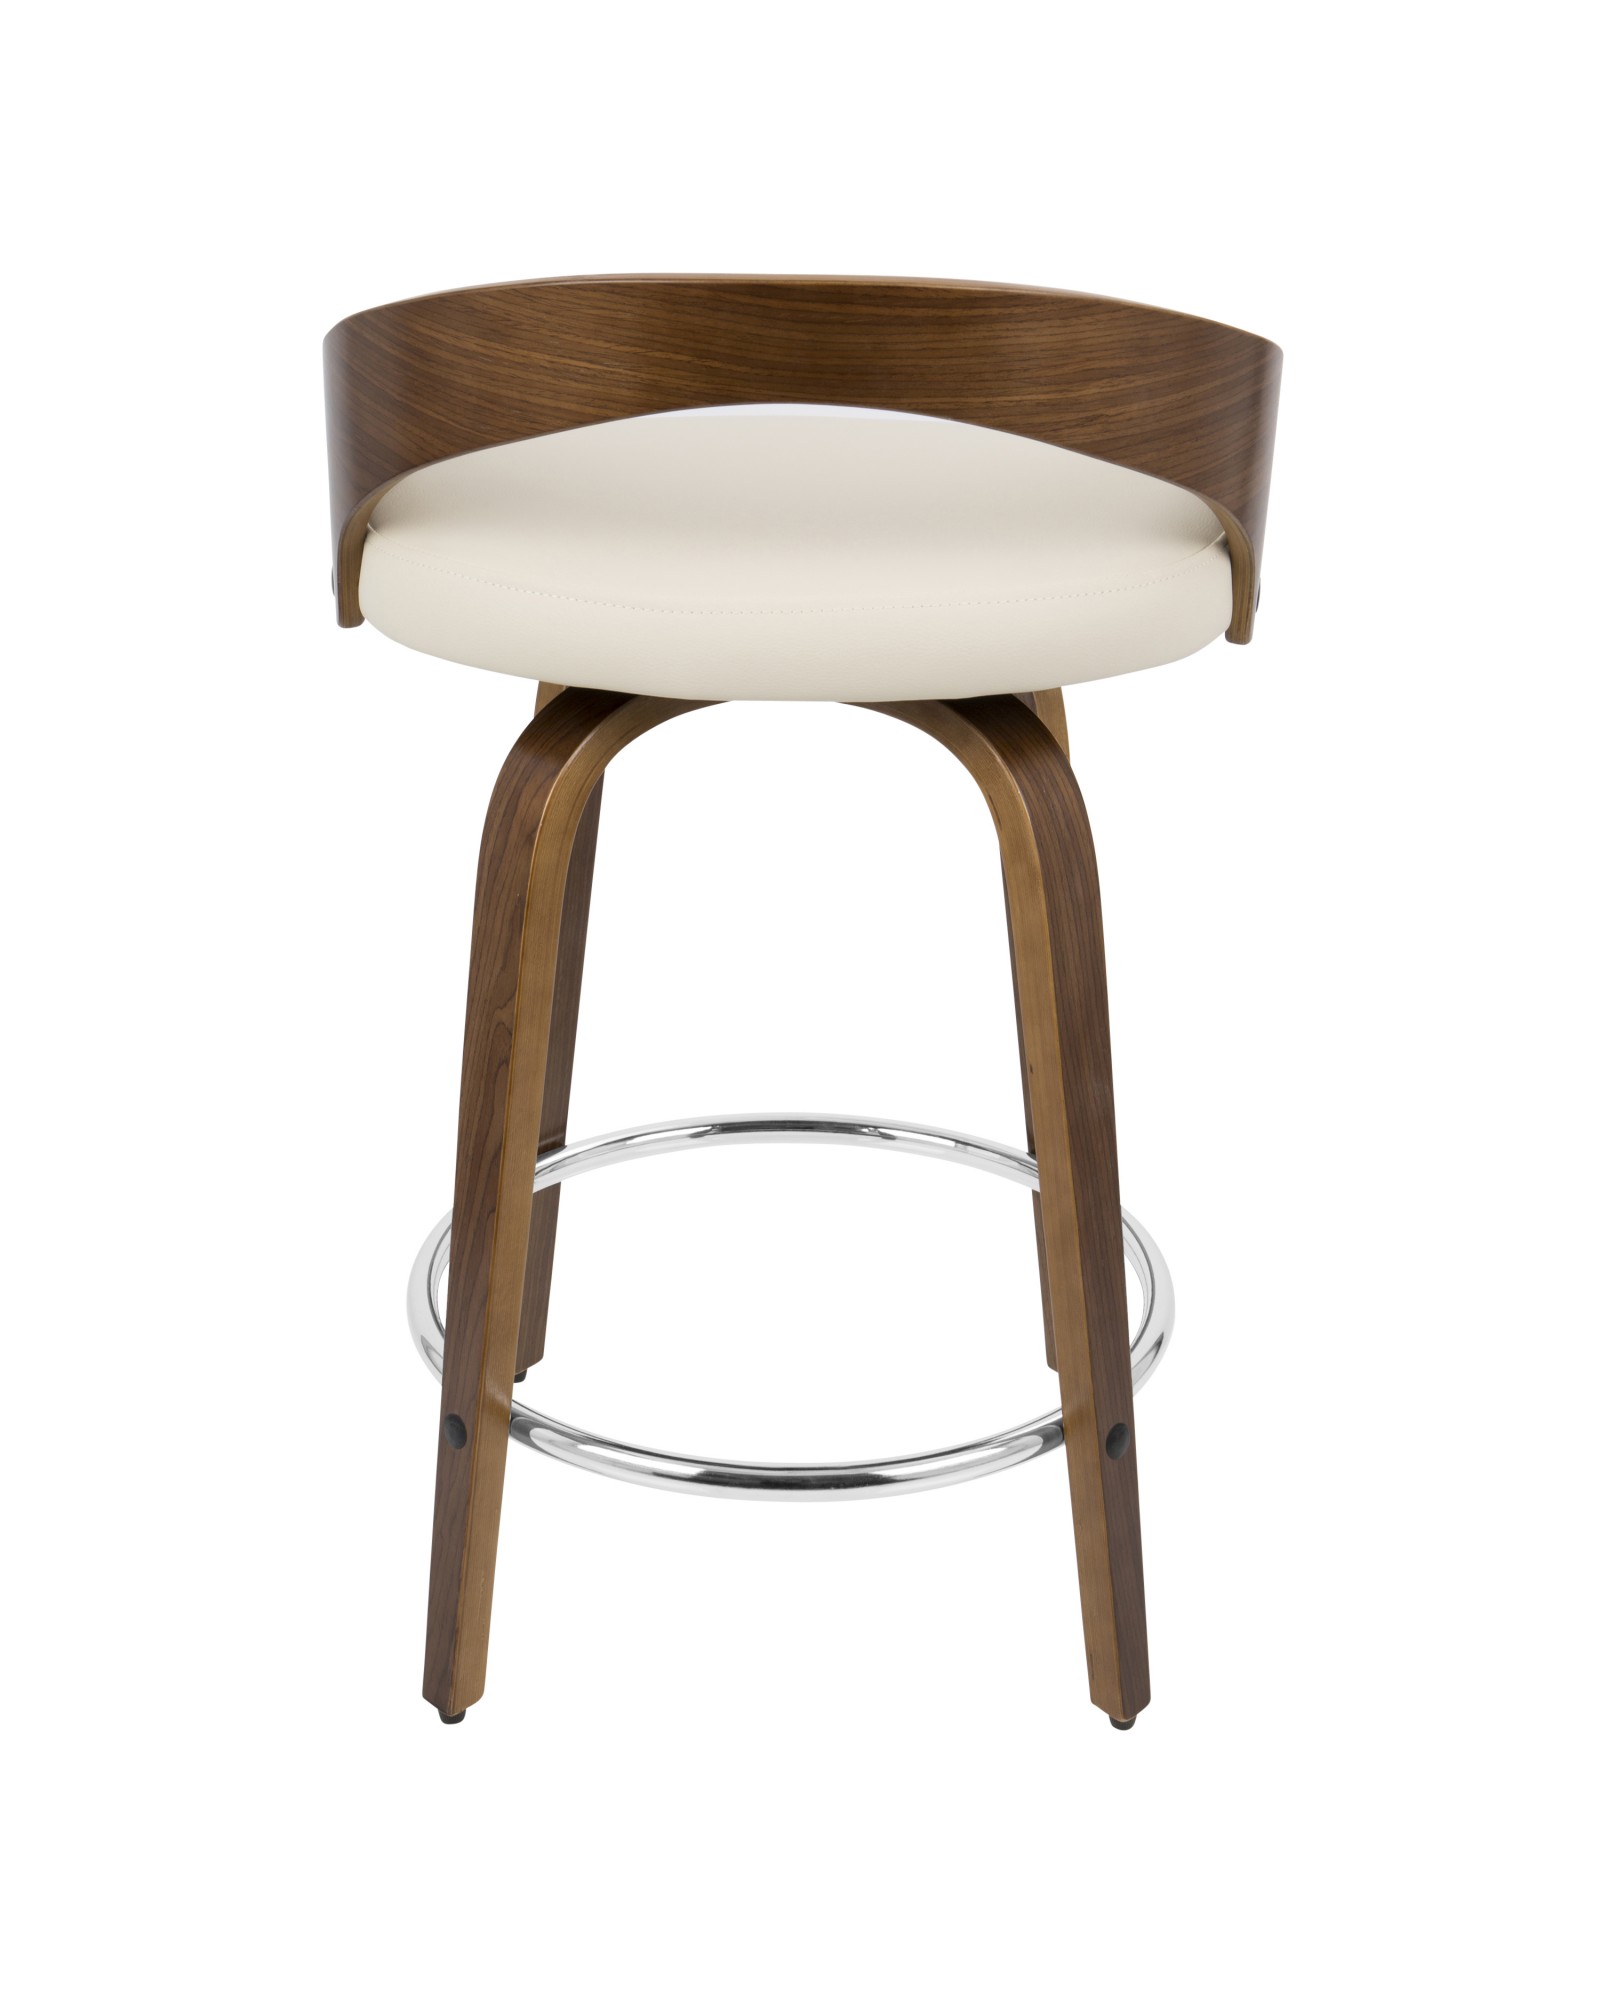 Grotto Mid-Century Modern Counter Stool with Swivel in Walnut with Cream Faux Leather